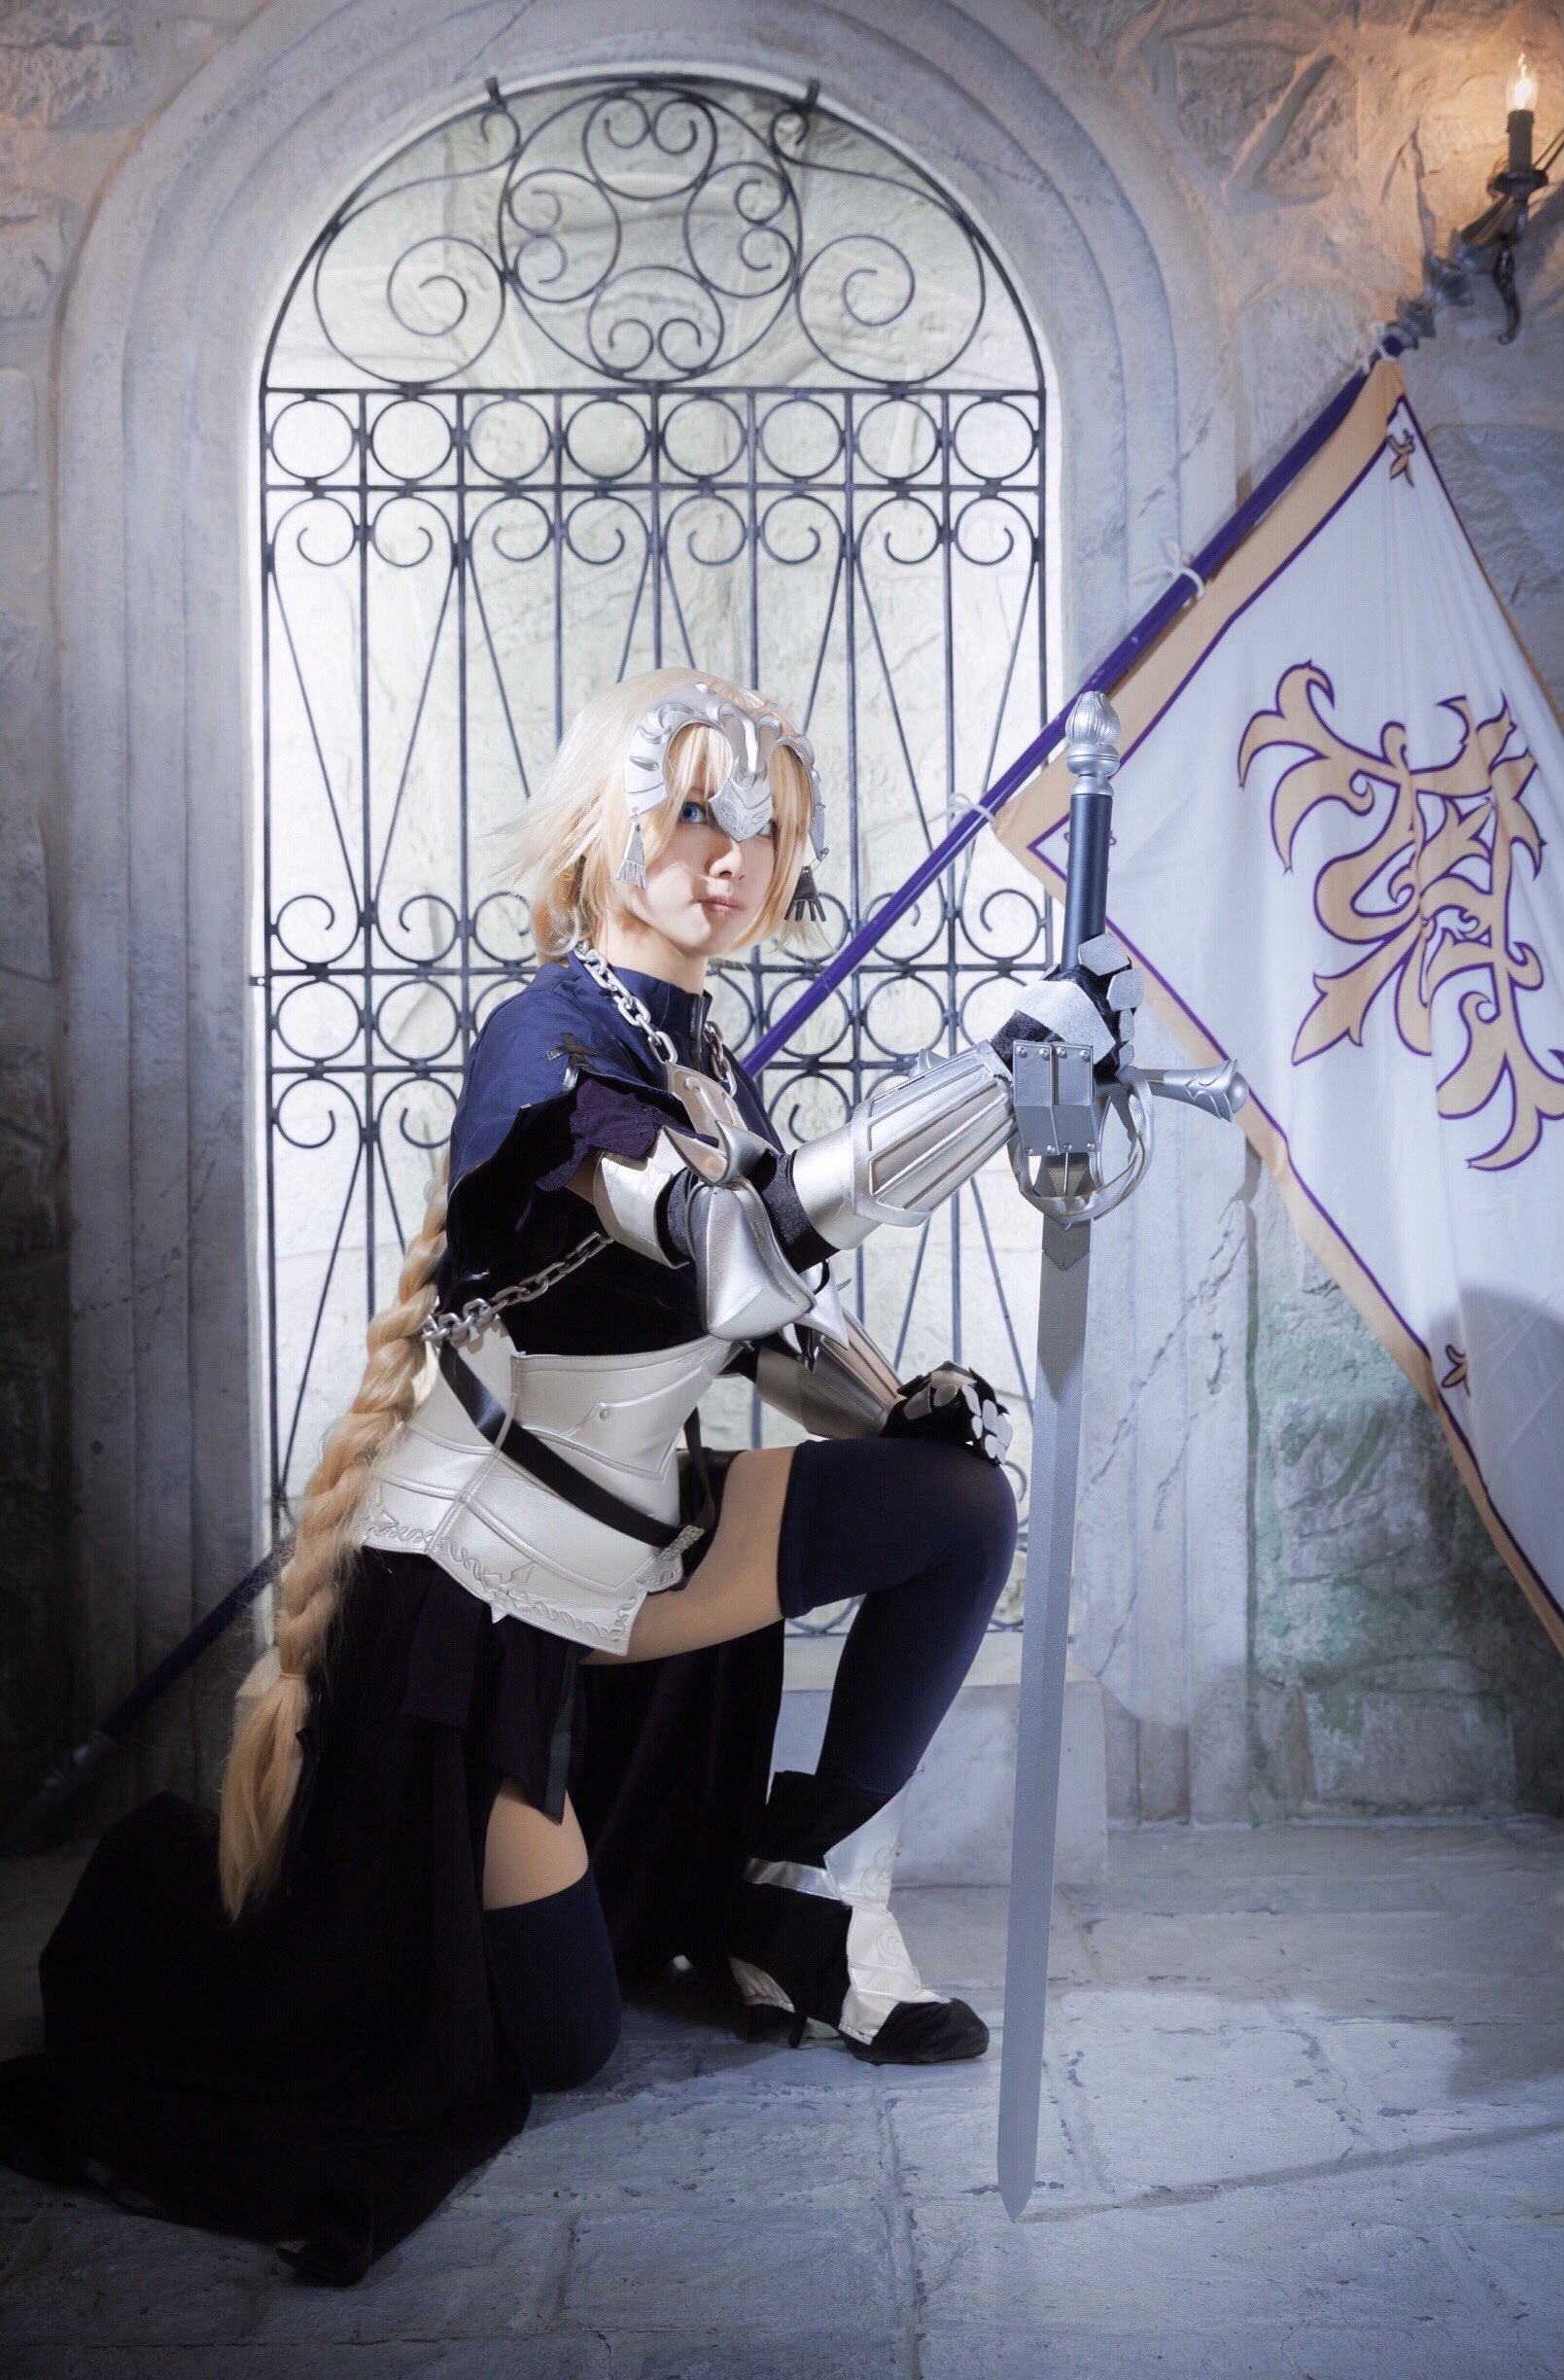 Jeanne DArc Fate Ruler Fate Apocrypha Asian Asian Cosplayer Cosplay Japanese Japanese Women Women Lo 1609x2448